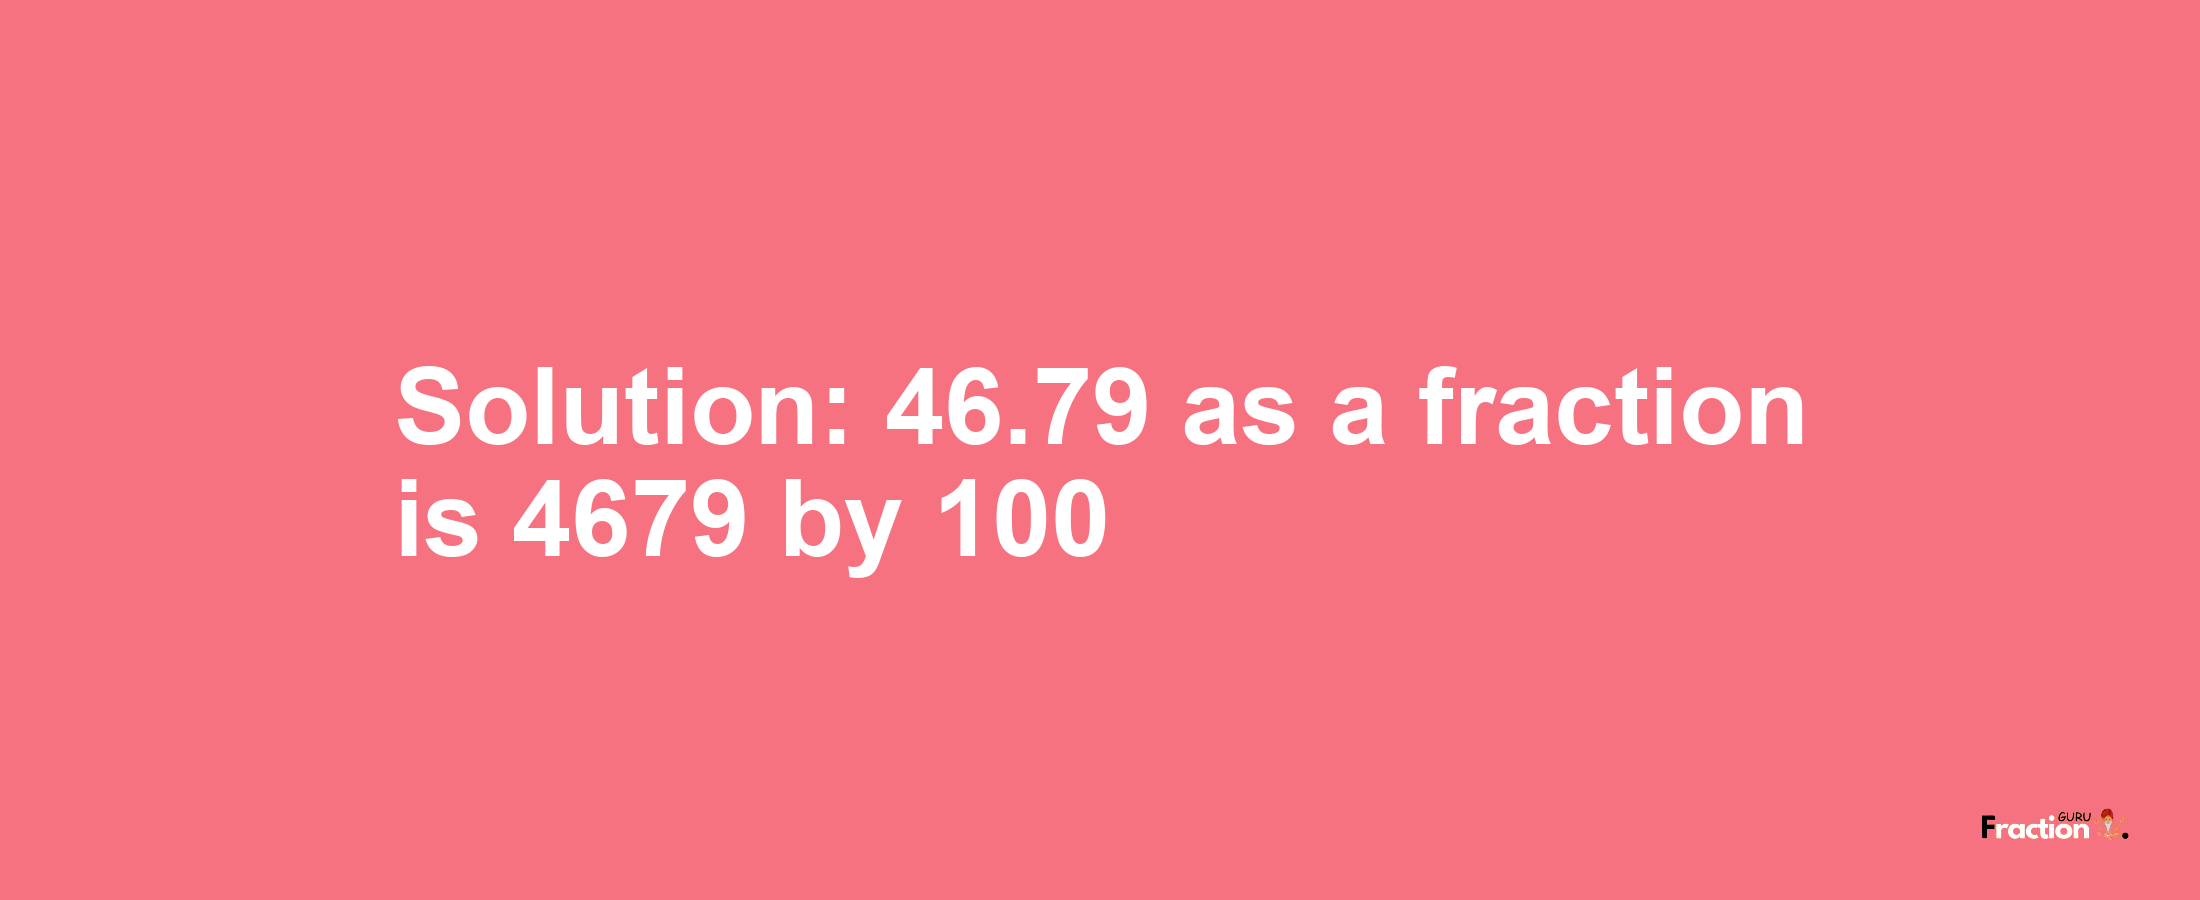 Solution:46.79 as a fraction is 4679/100